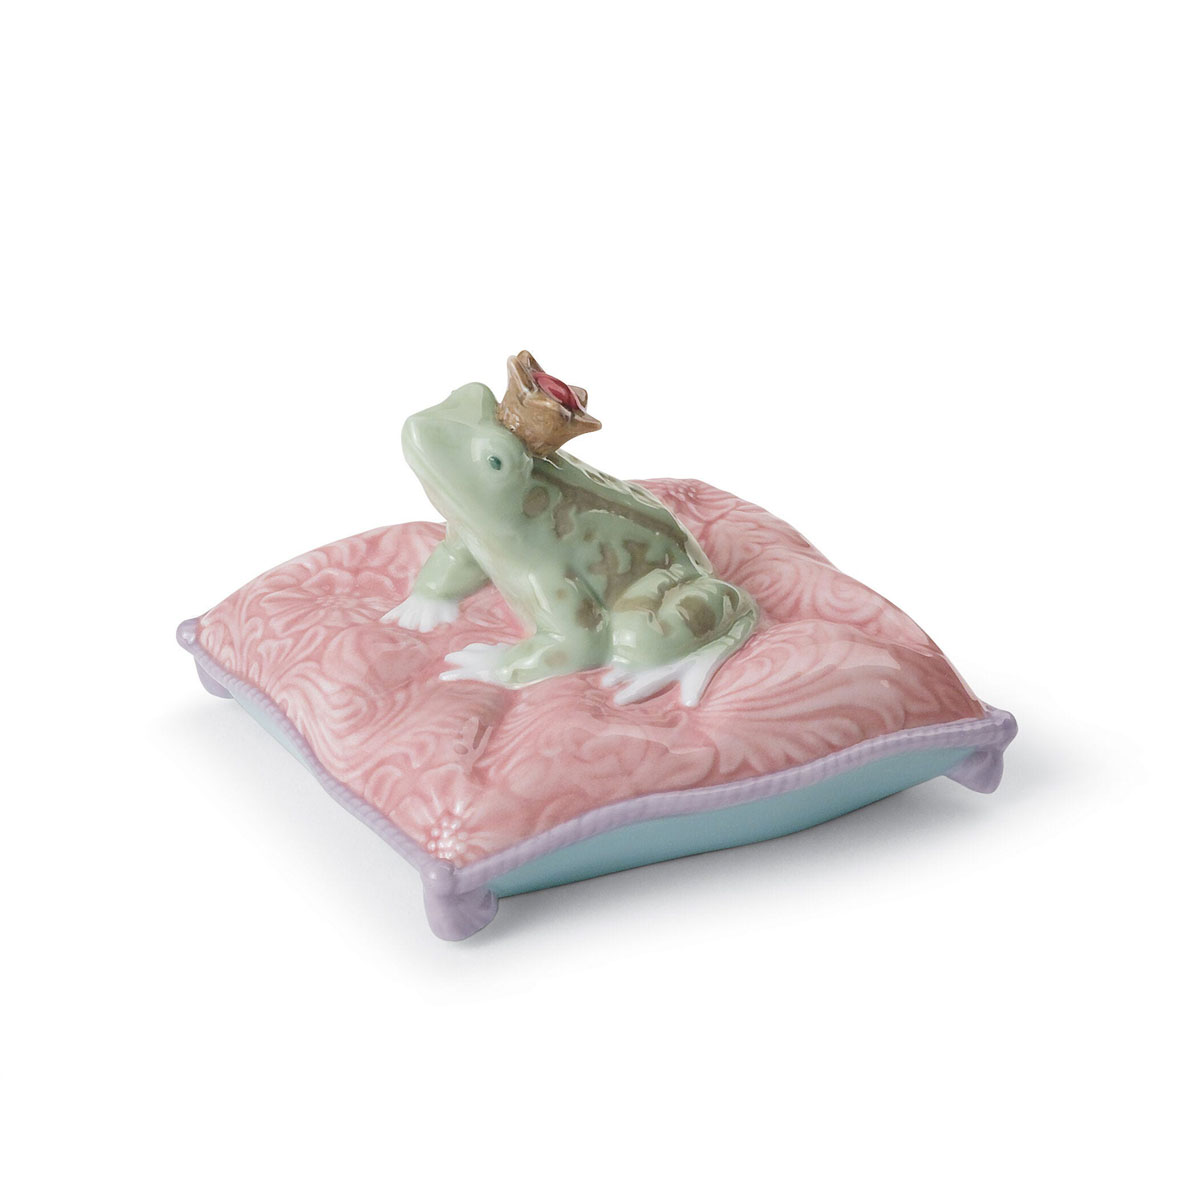 Lladro Classic Sculpture, Enchanted Prince Frog Figurine